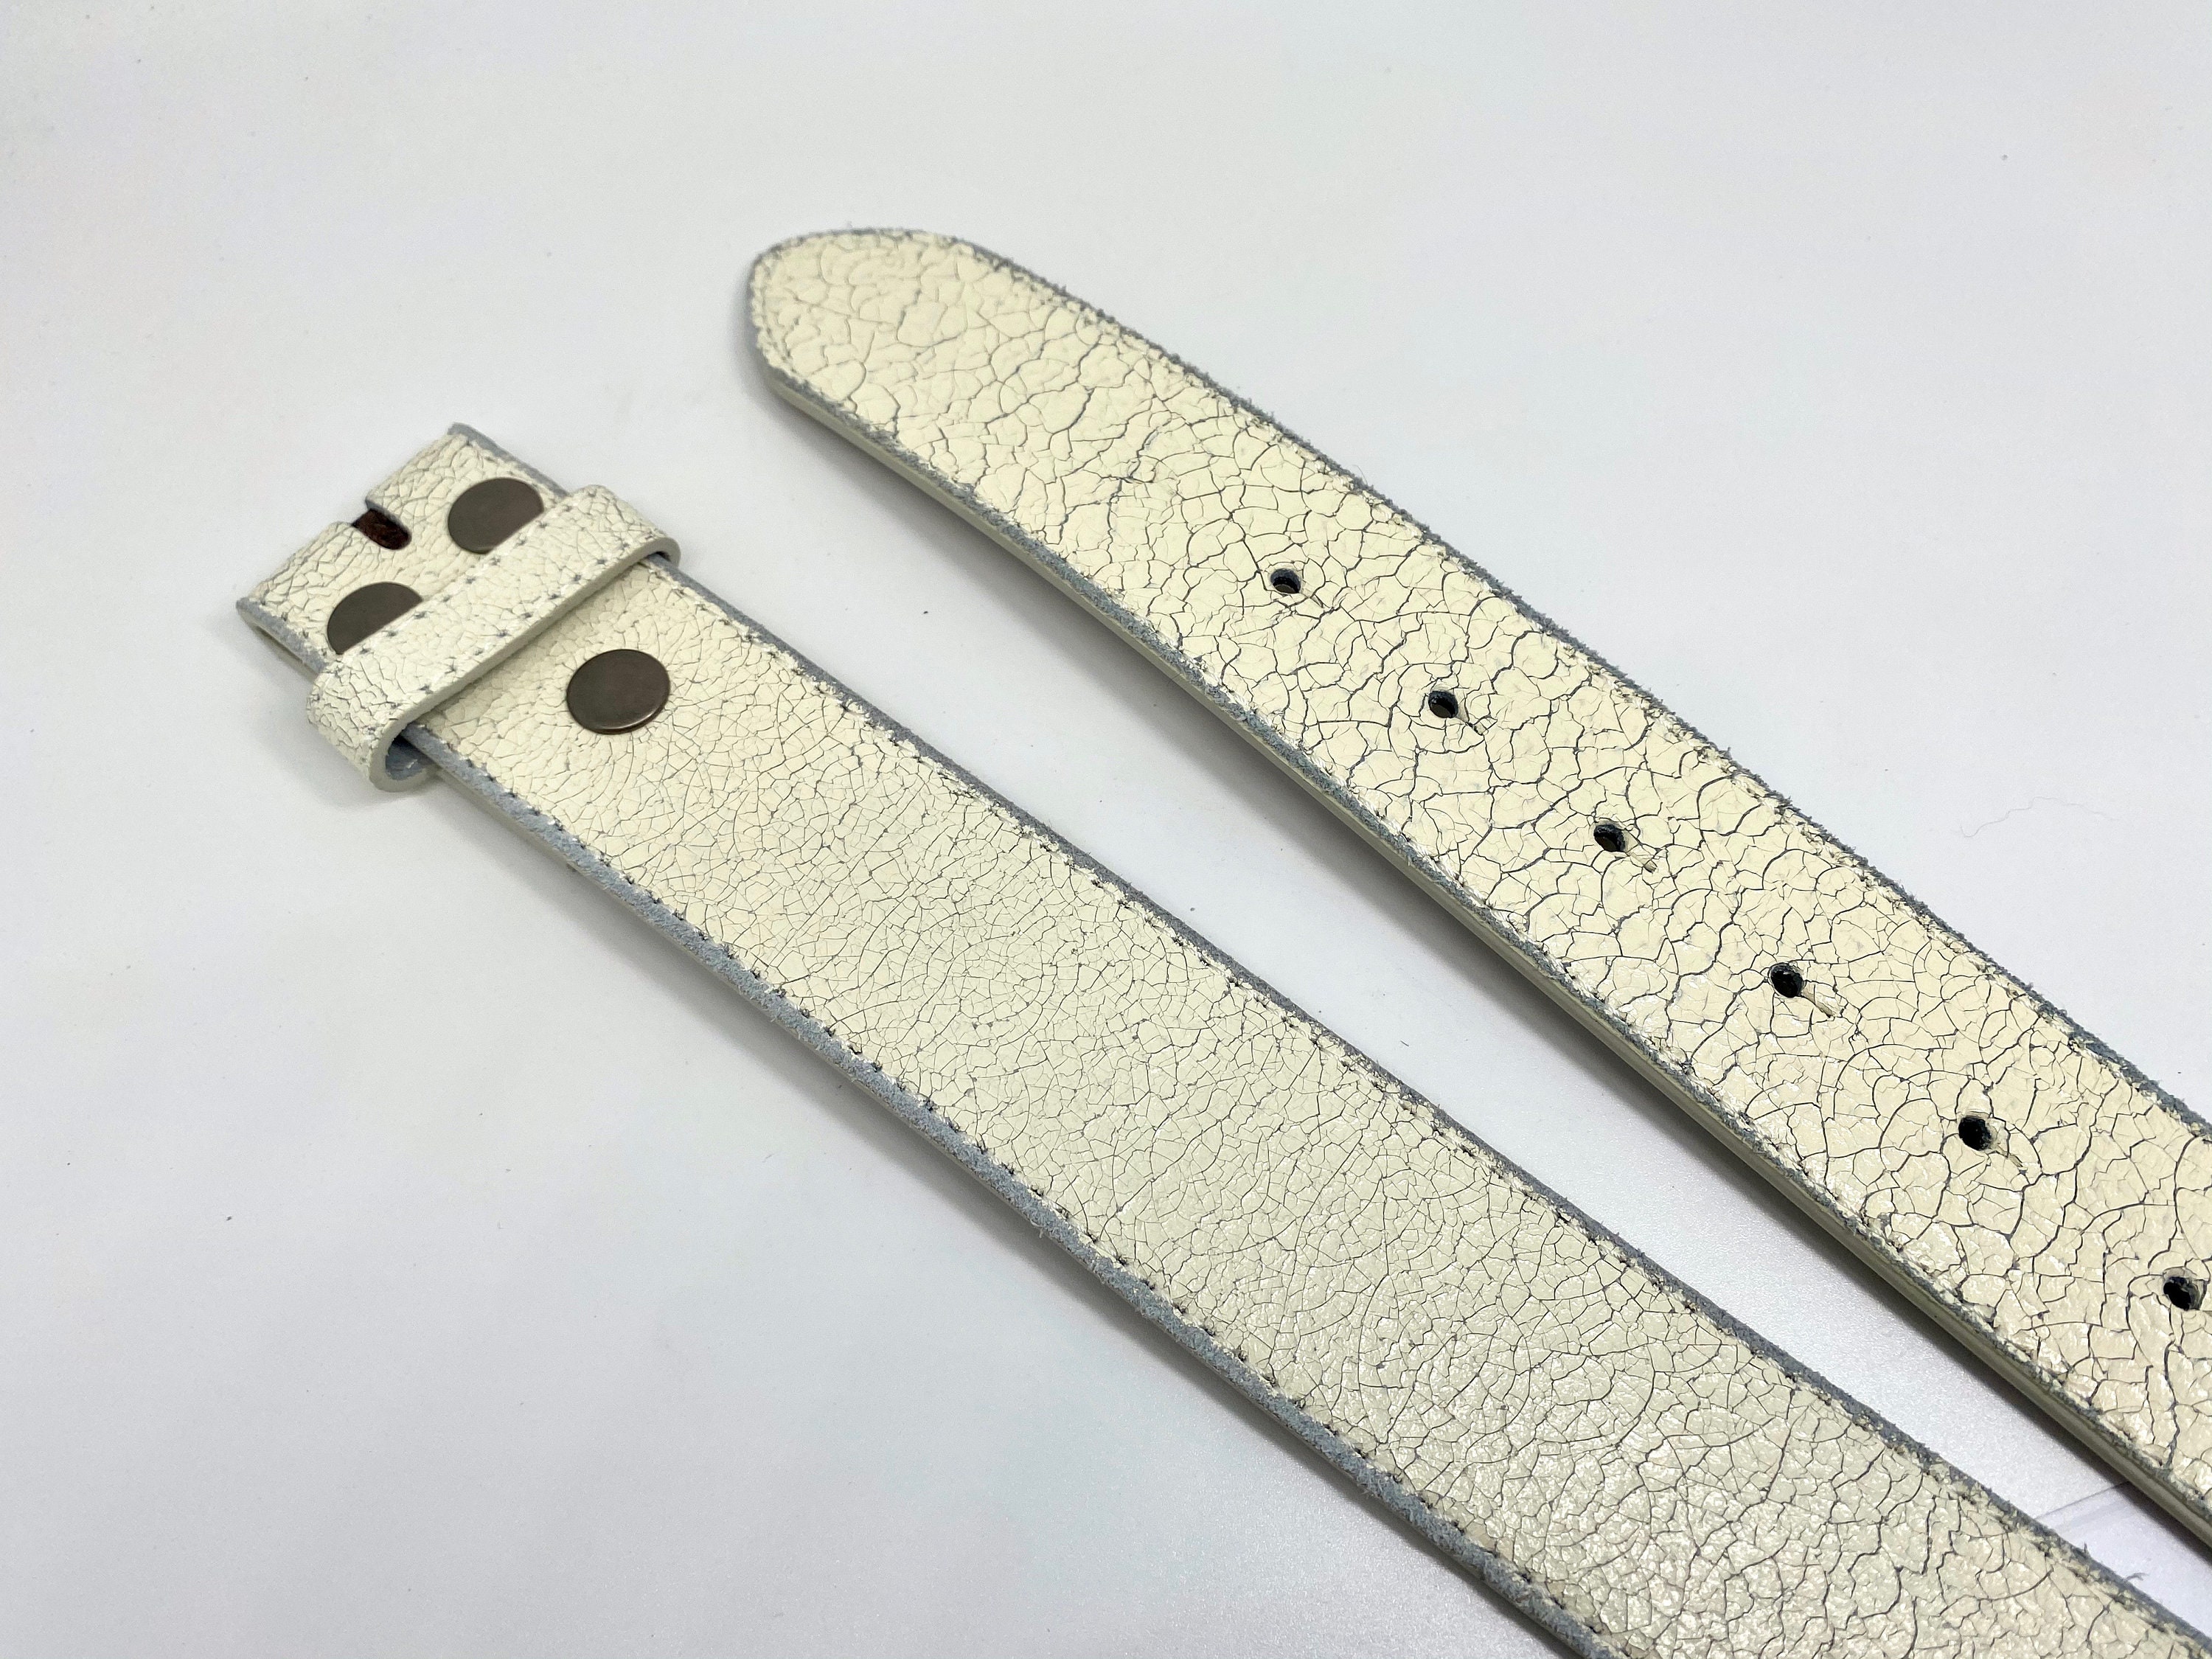 Distressed White Crackle Leather Belt Strap for Buckles - Etsy